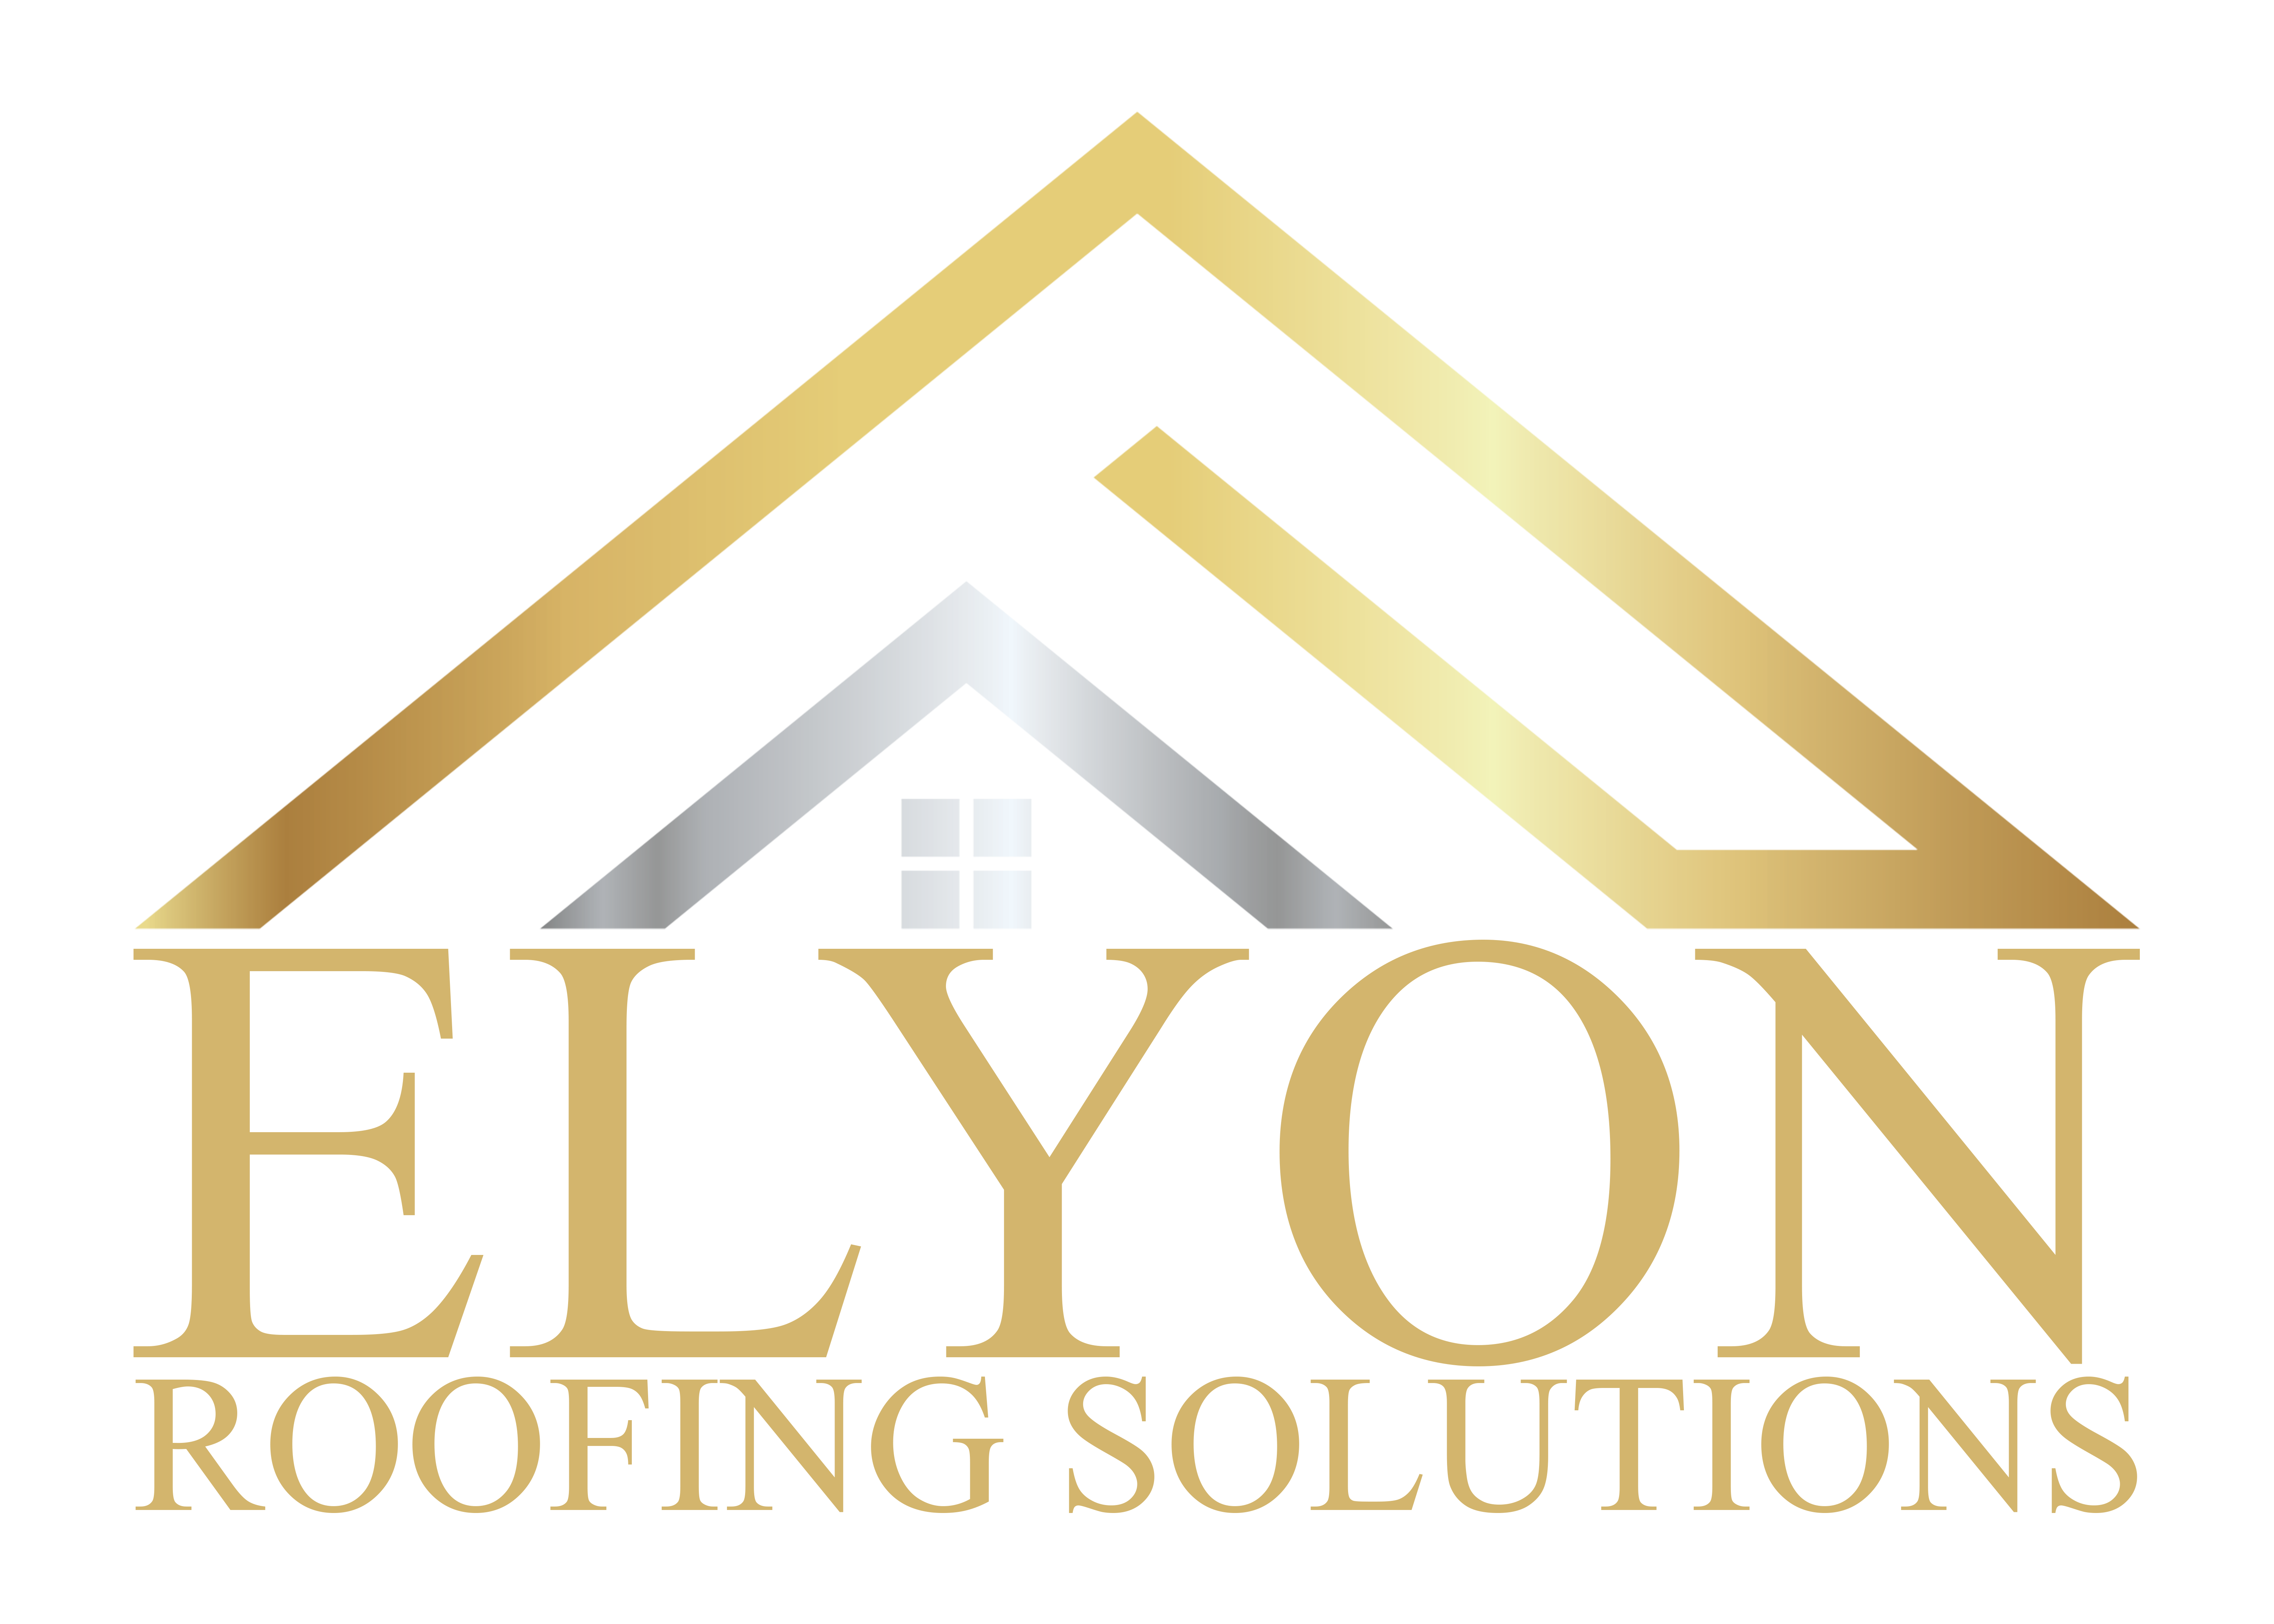 Elyon Roofing Solutions, LLC